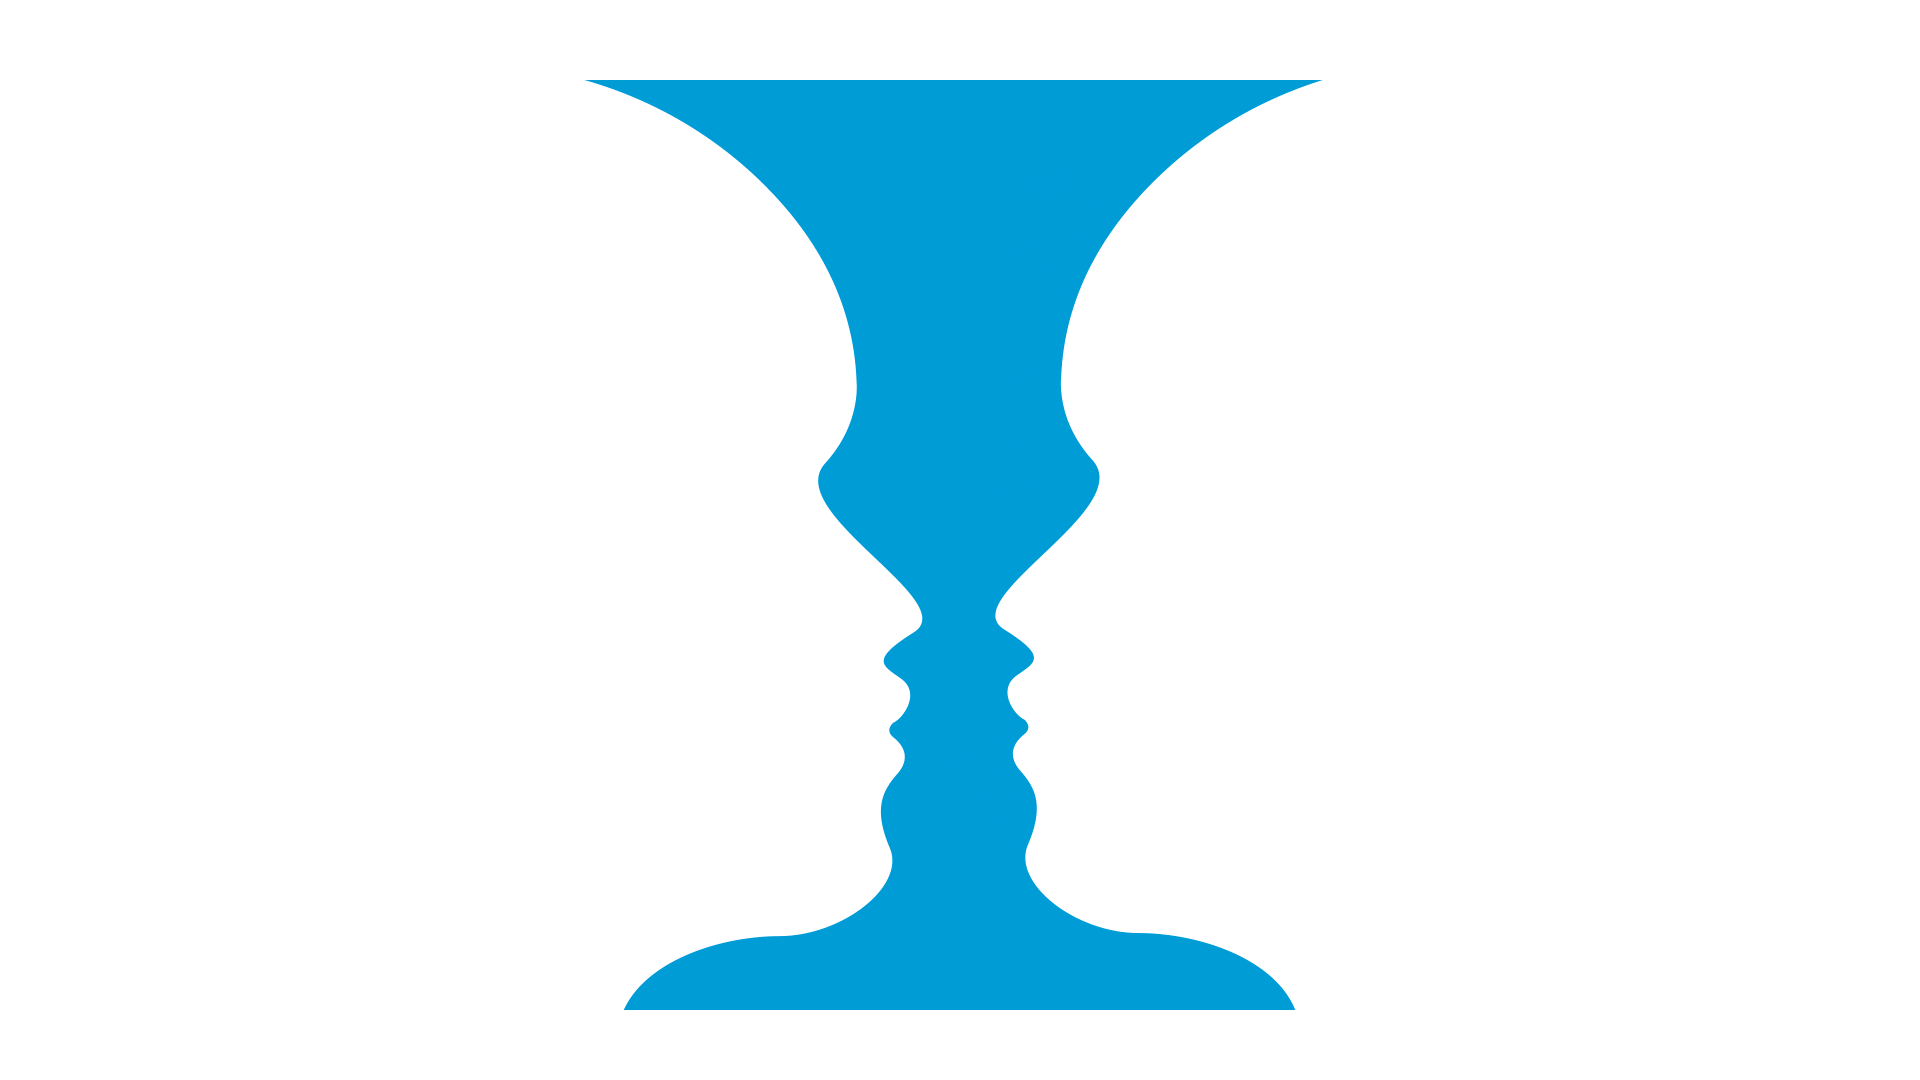 The animation begins with a side view of 2 blue head silhouettes facing each other. The negative space between the faces becomes blue and the faces become the colour of the background (white). This negative space forms a blue wine glass with a symmetrical stem.